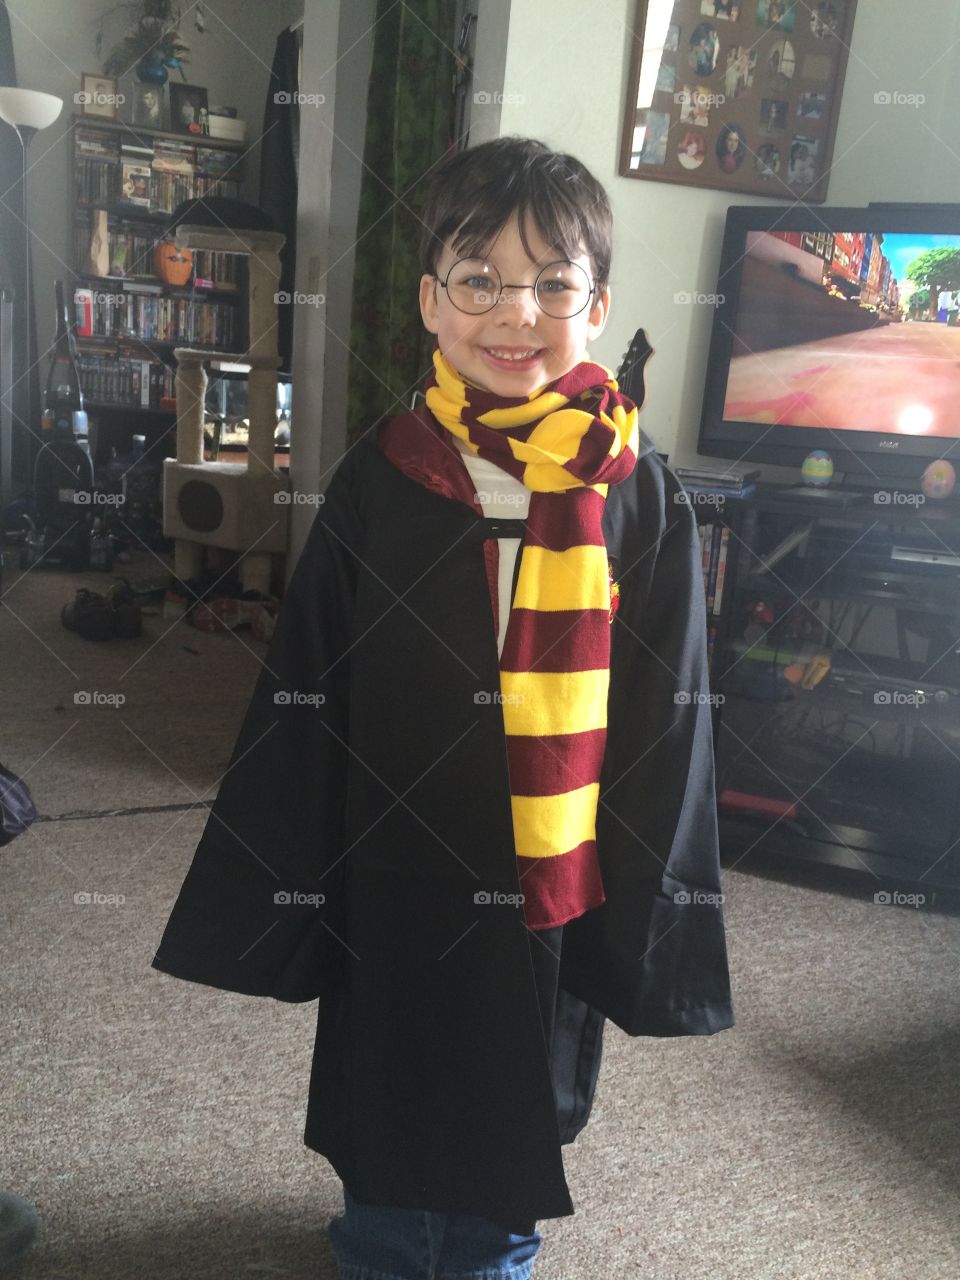 My son . My son dresses as his hero,Harry Potter. 